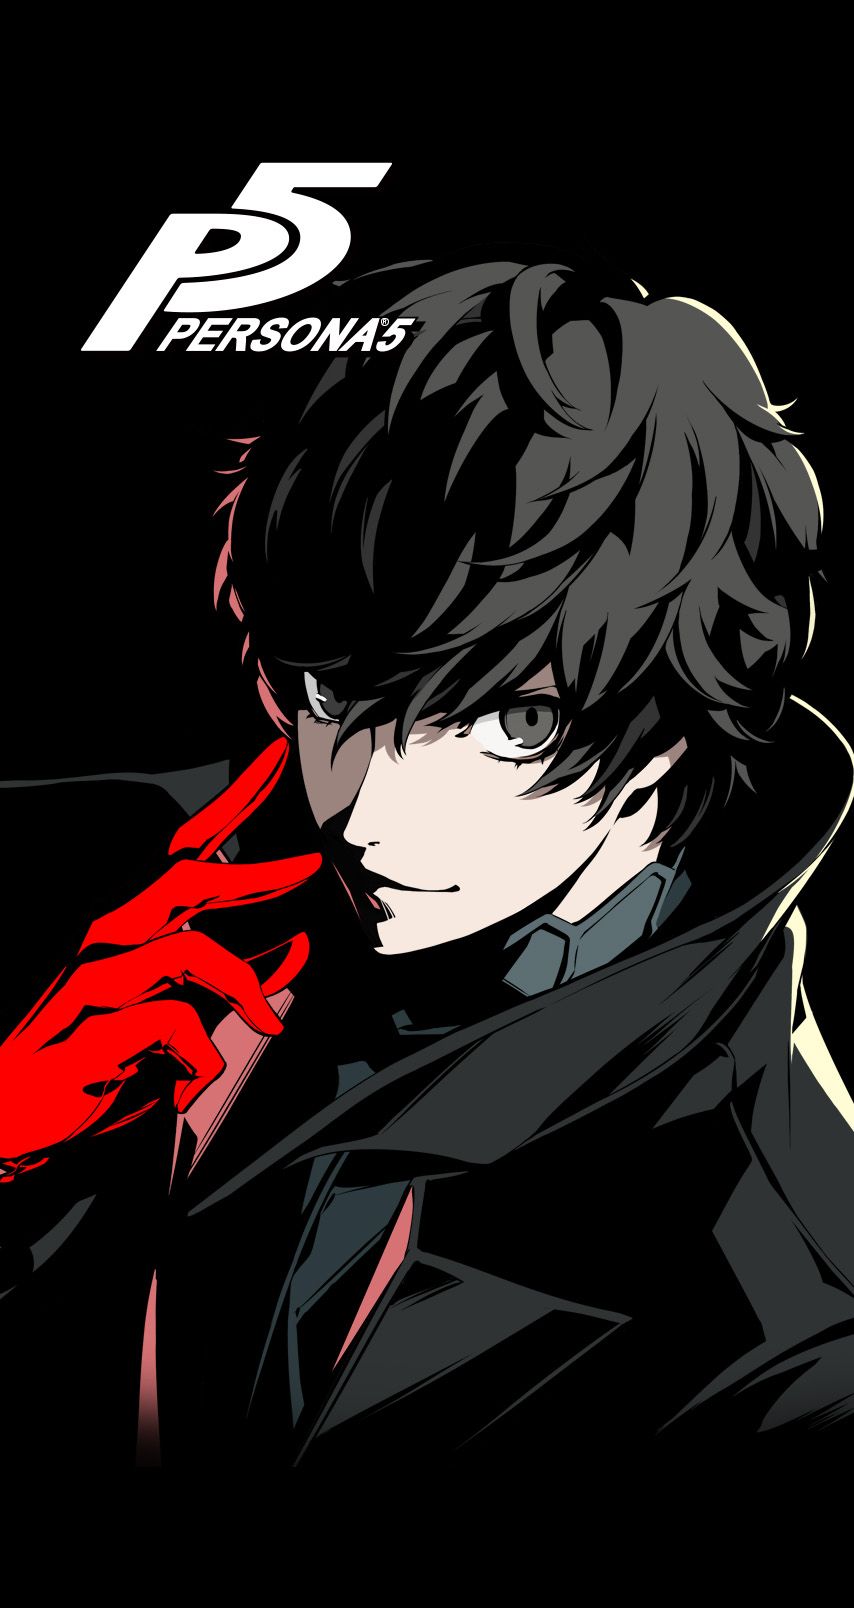 Persona 5 The Animation Phone Wallpaper by Sephiroth508  Mobile Abyss